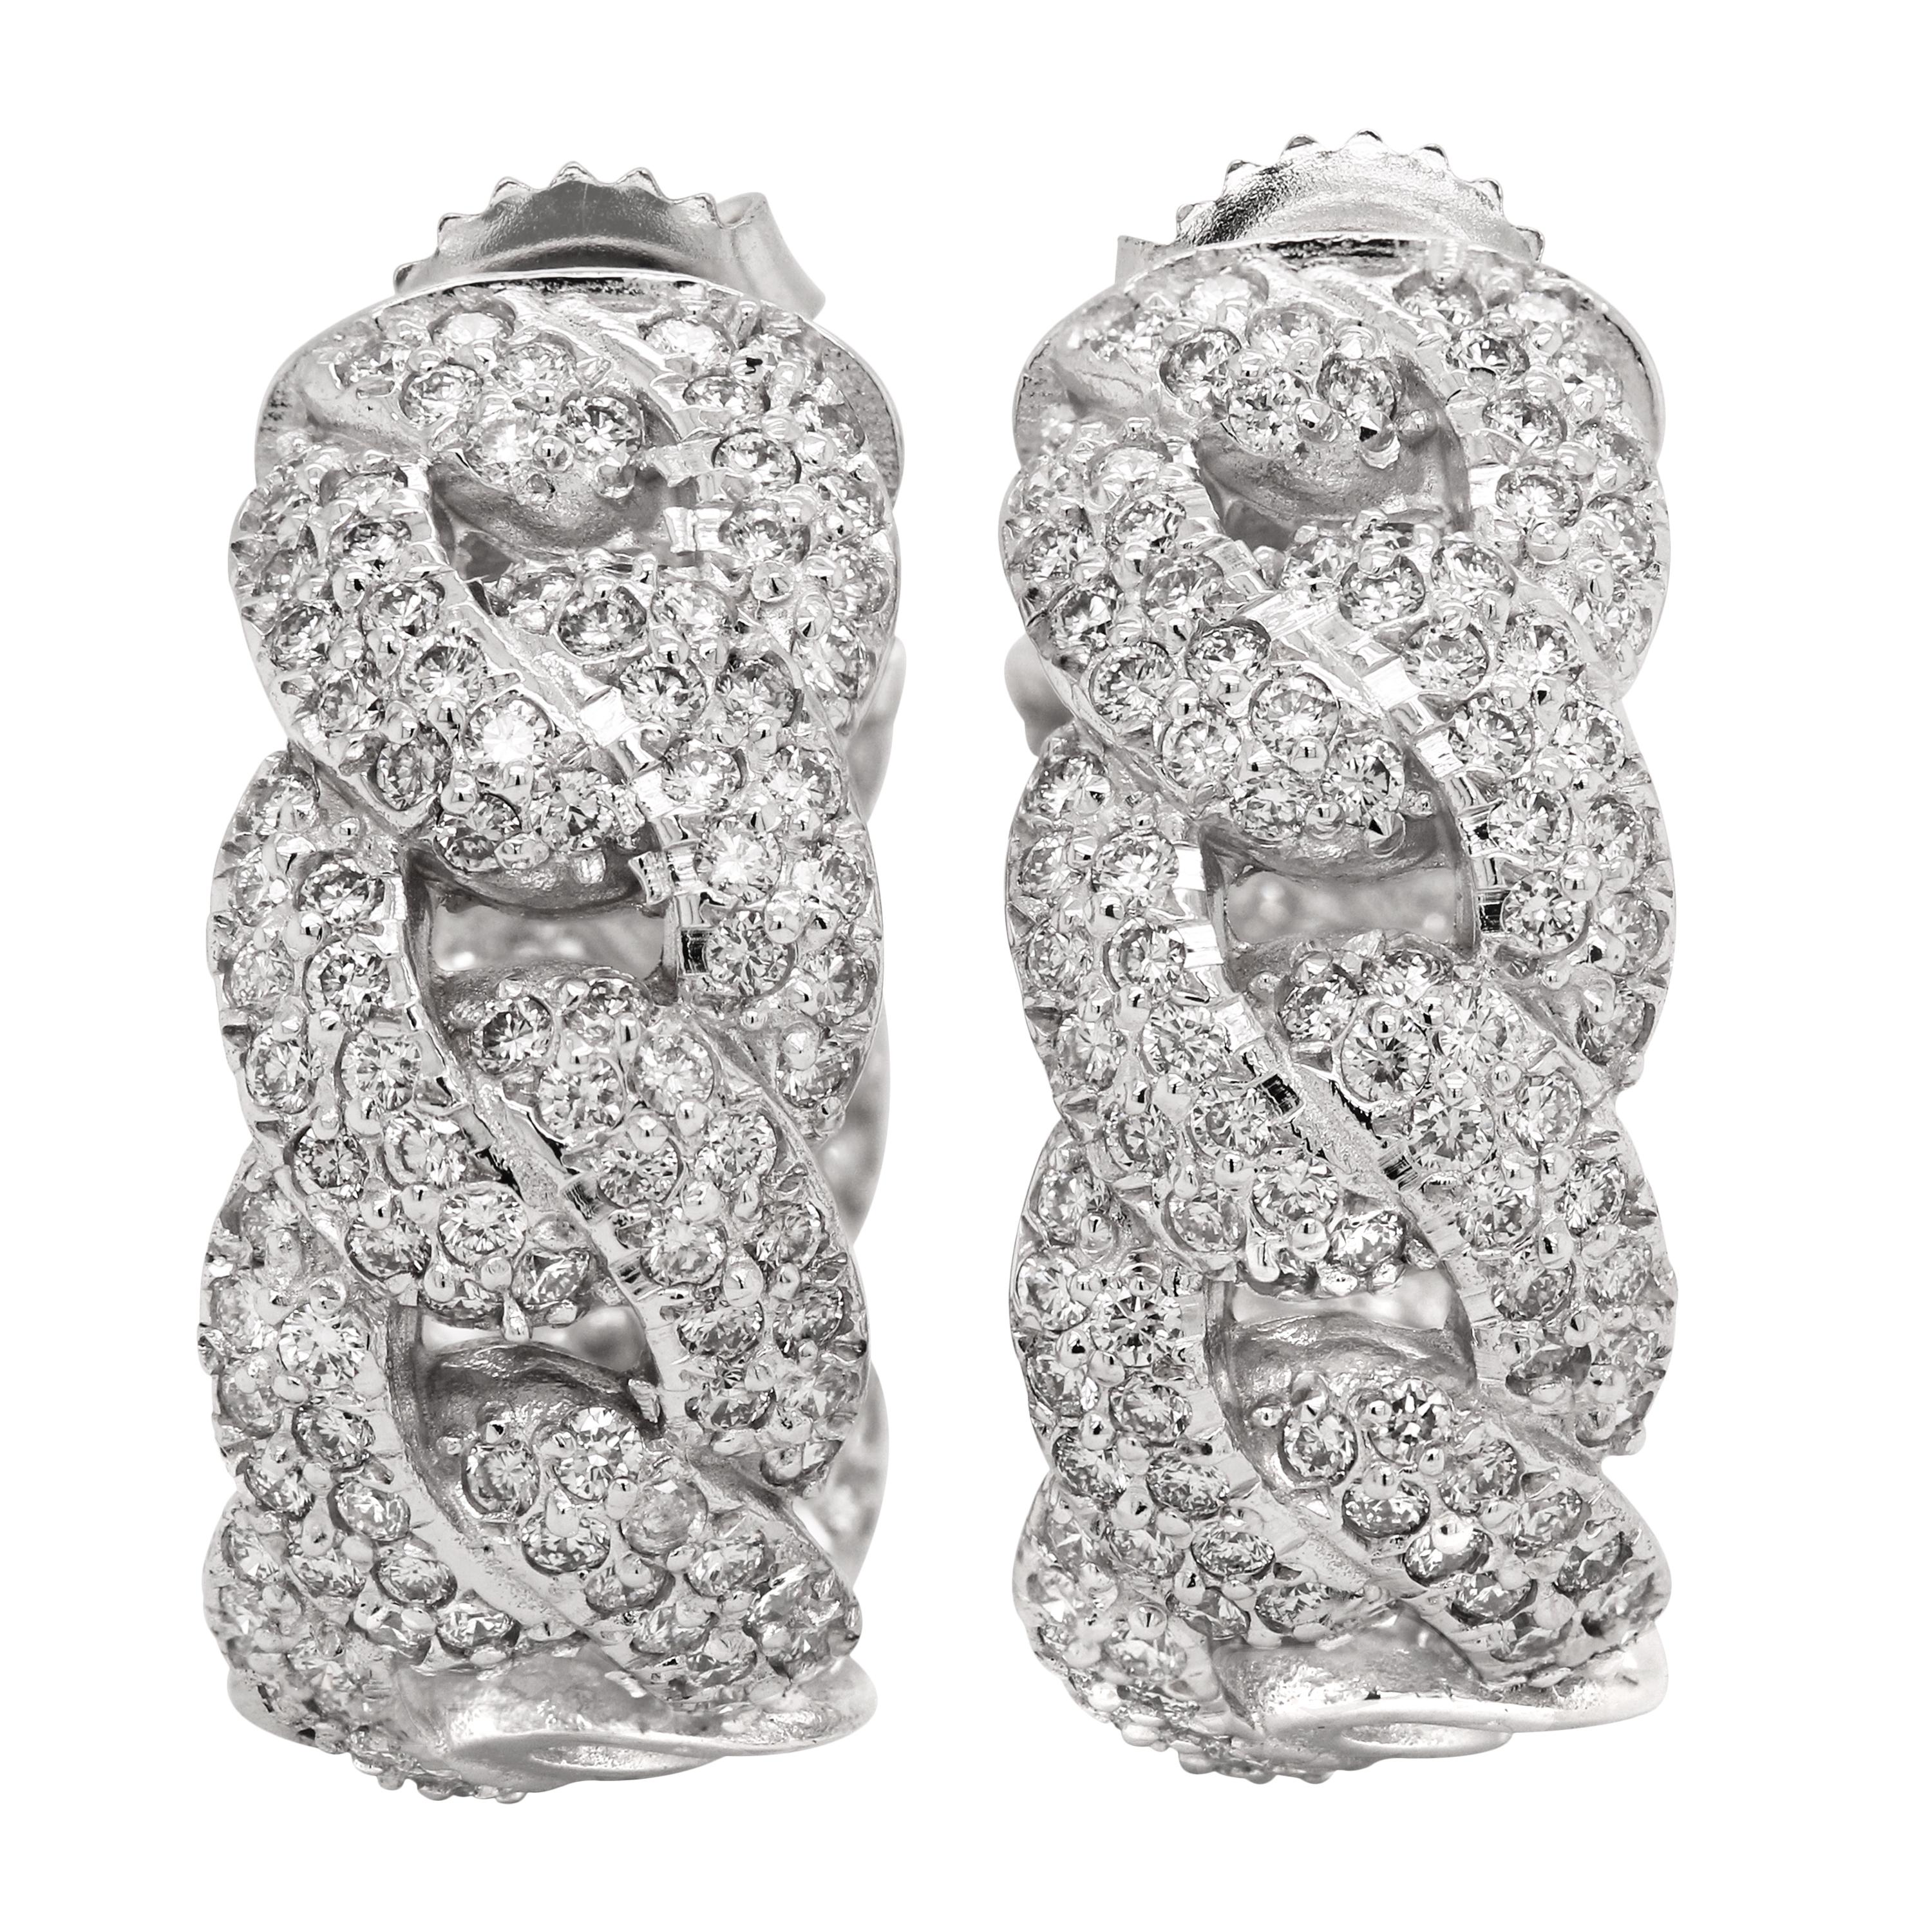 Stambolian 18 Karat White Gold Diamond Cuban Link Inside Out Hoop Earrings

This gorgeous pair of earrings by Stambolian features a cuban link design with diamonds set inside and out.

3.01 carat G color, VS clarity diamonds total weight

Earrings